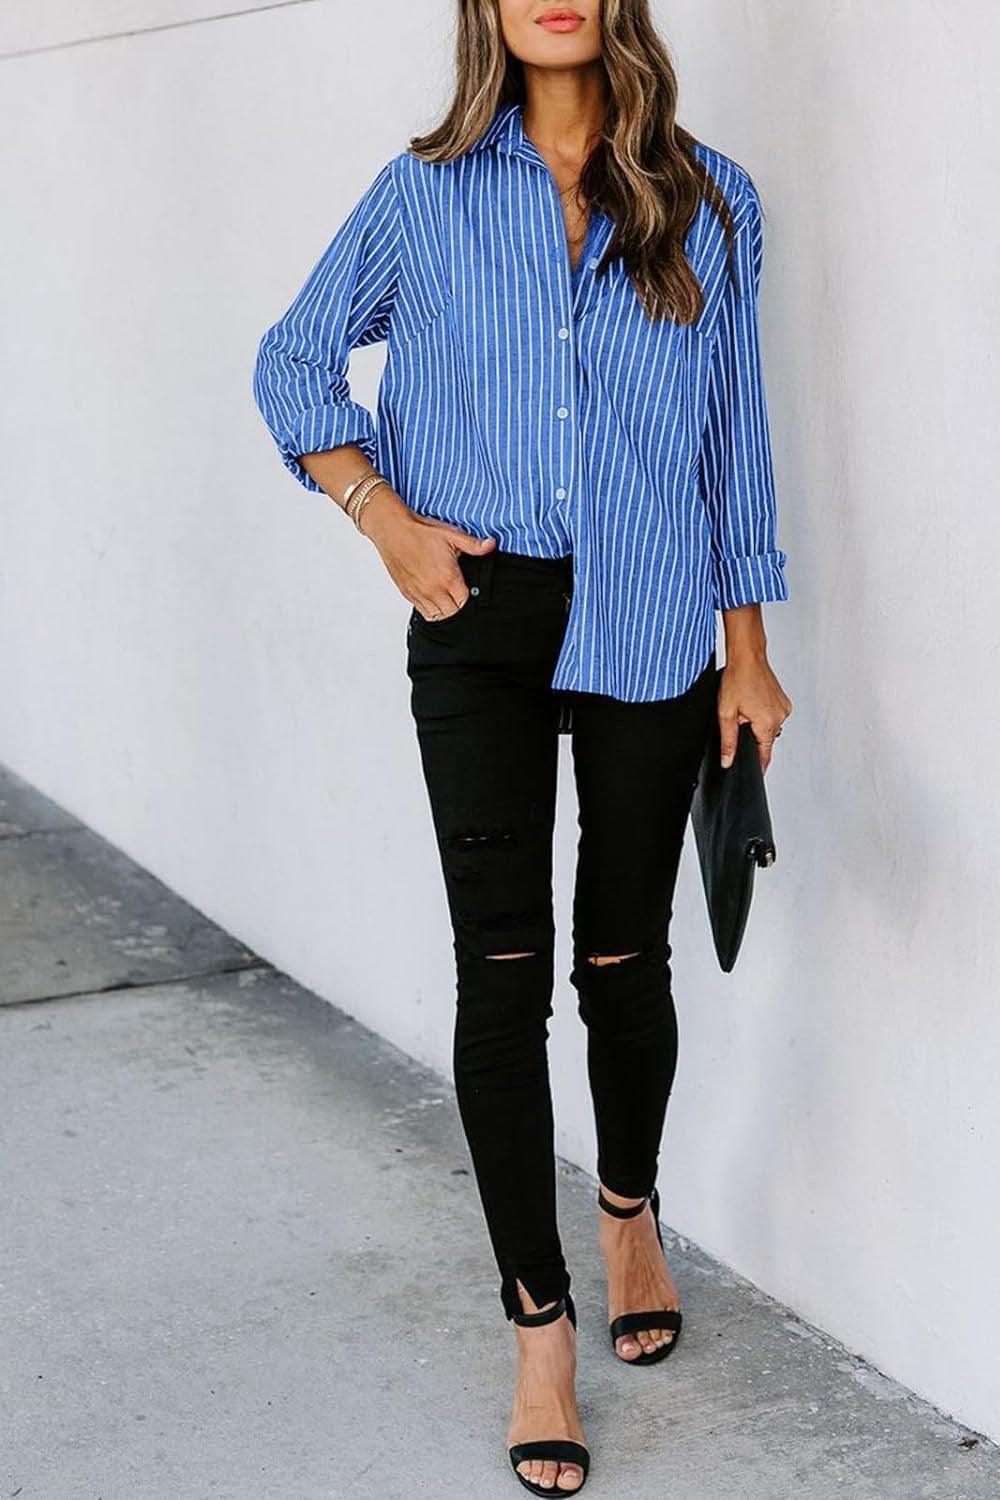 a woman wearing a blue striped shirt and black ripped jeans